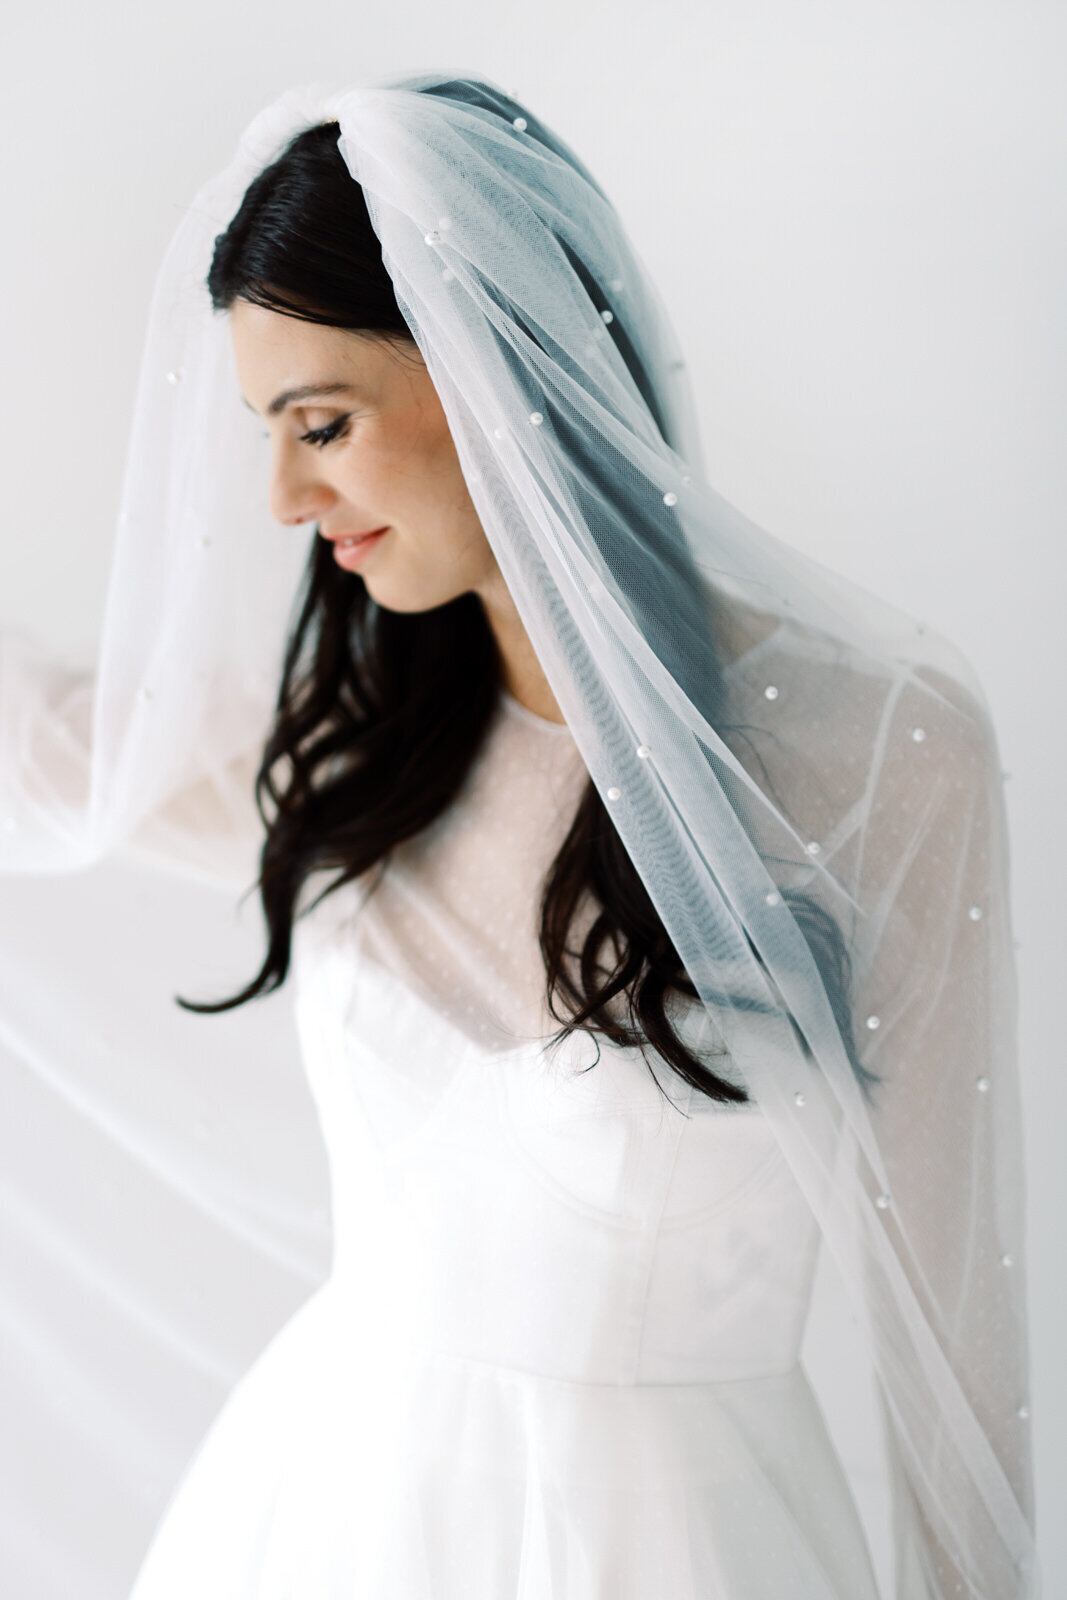 Stylish Bridal Editorial Photography for a New York City Brand 18